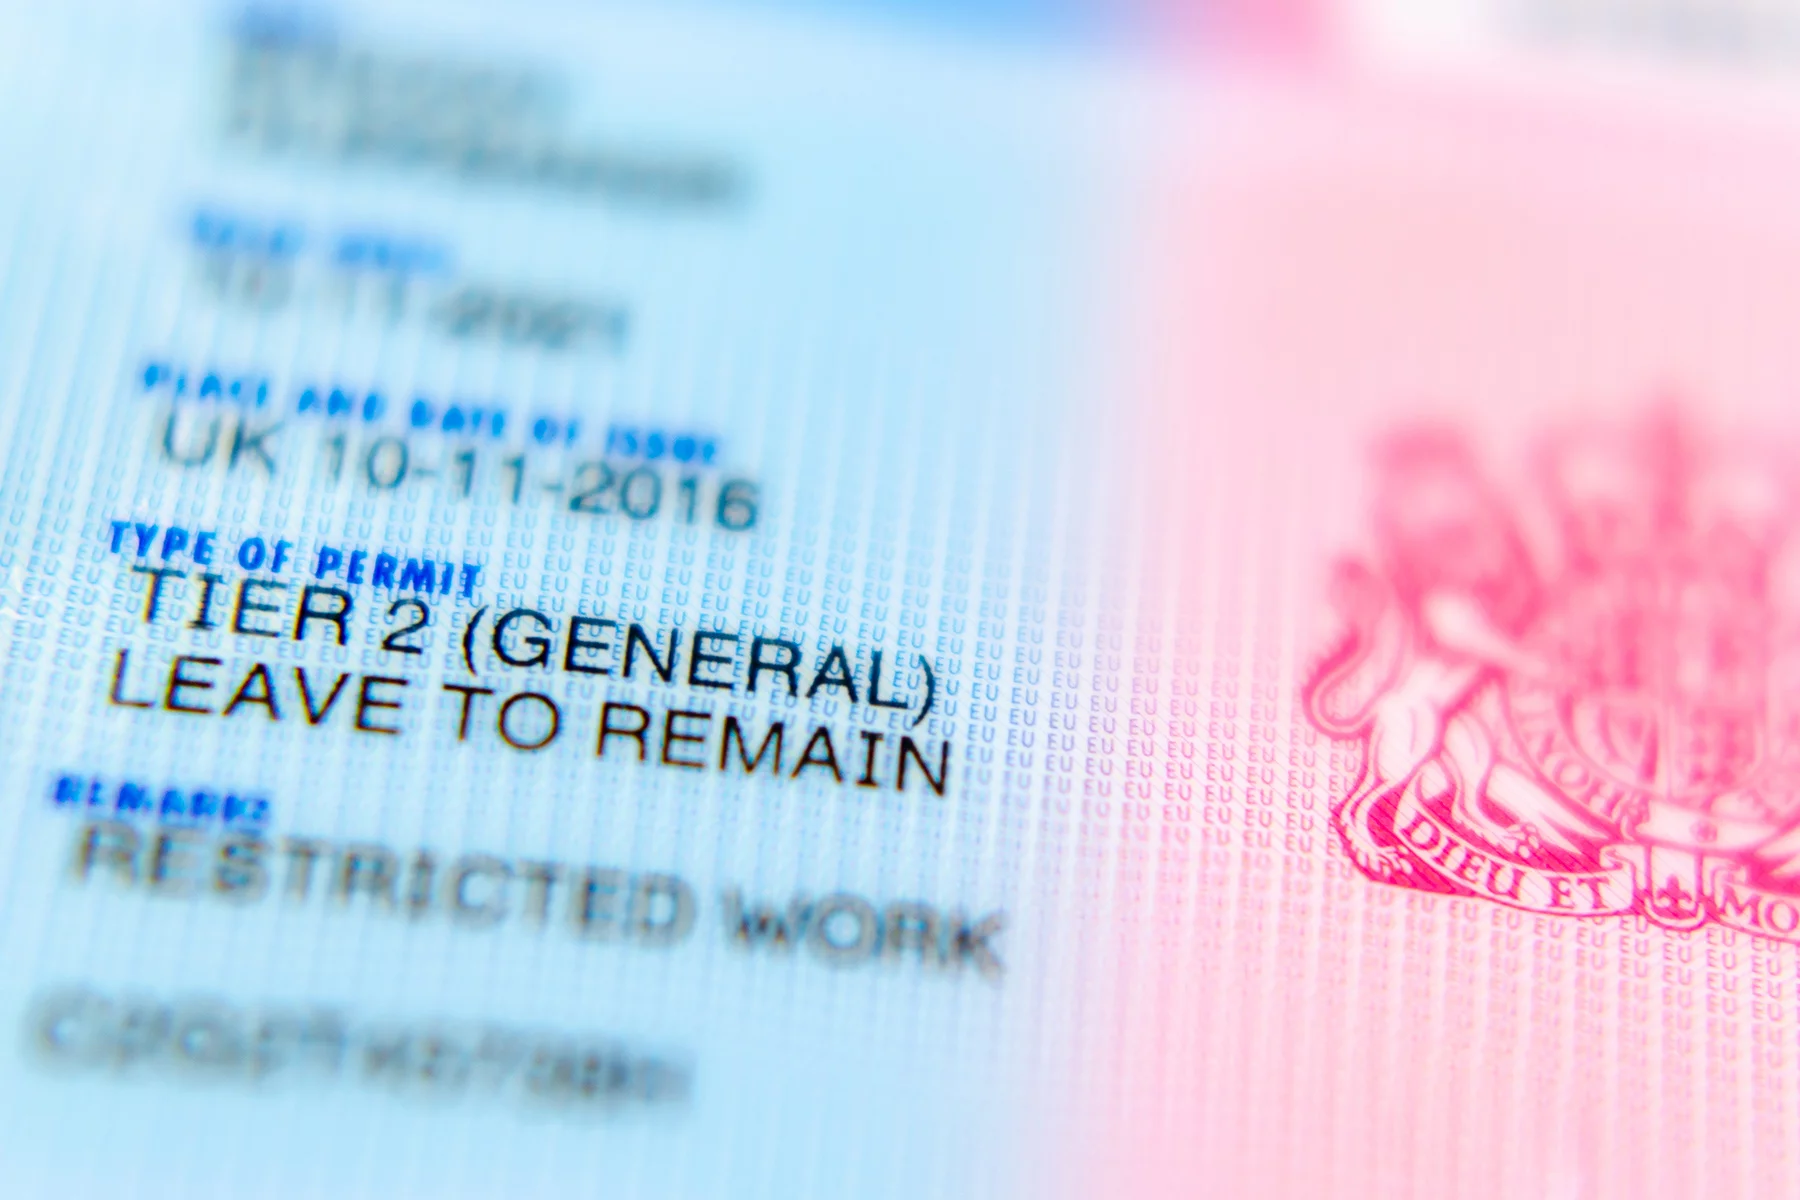 A Tier 2 residence permit for the UK